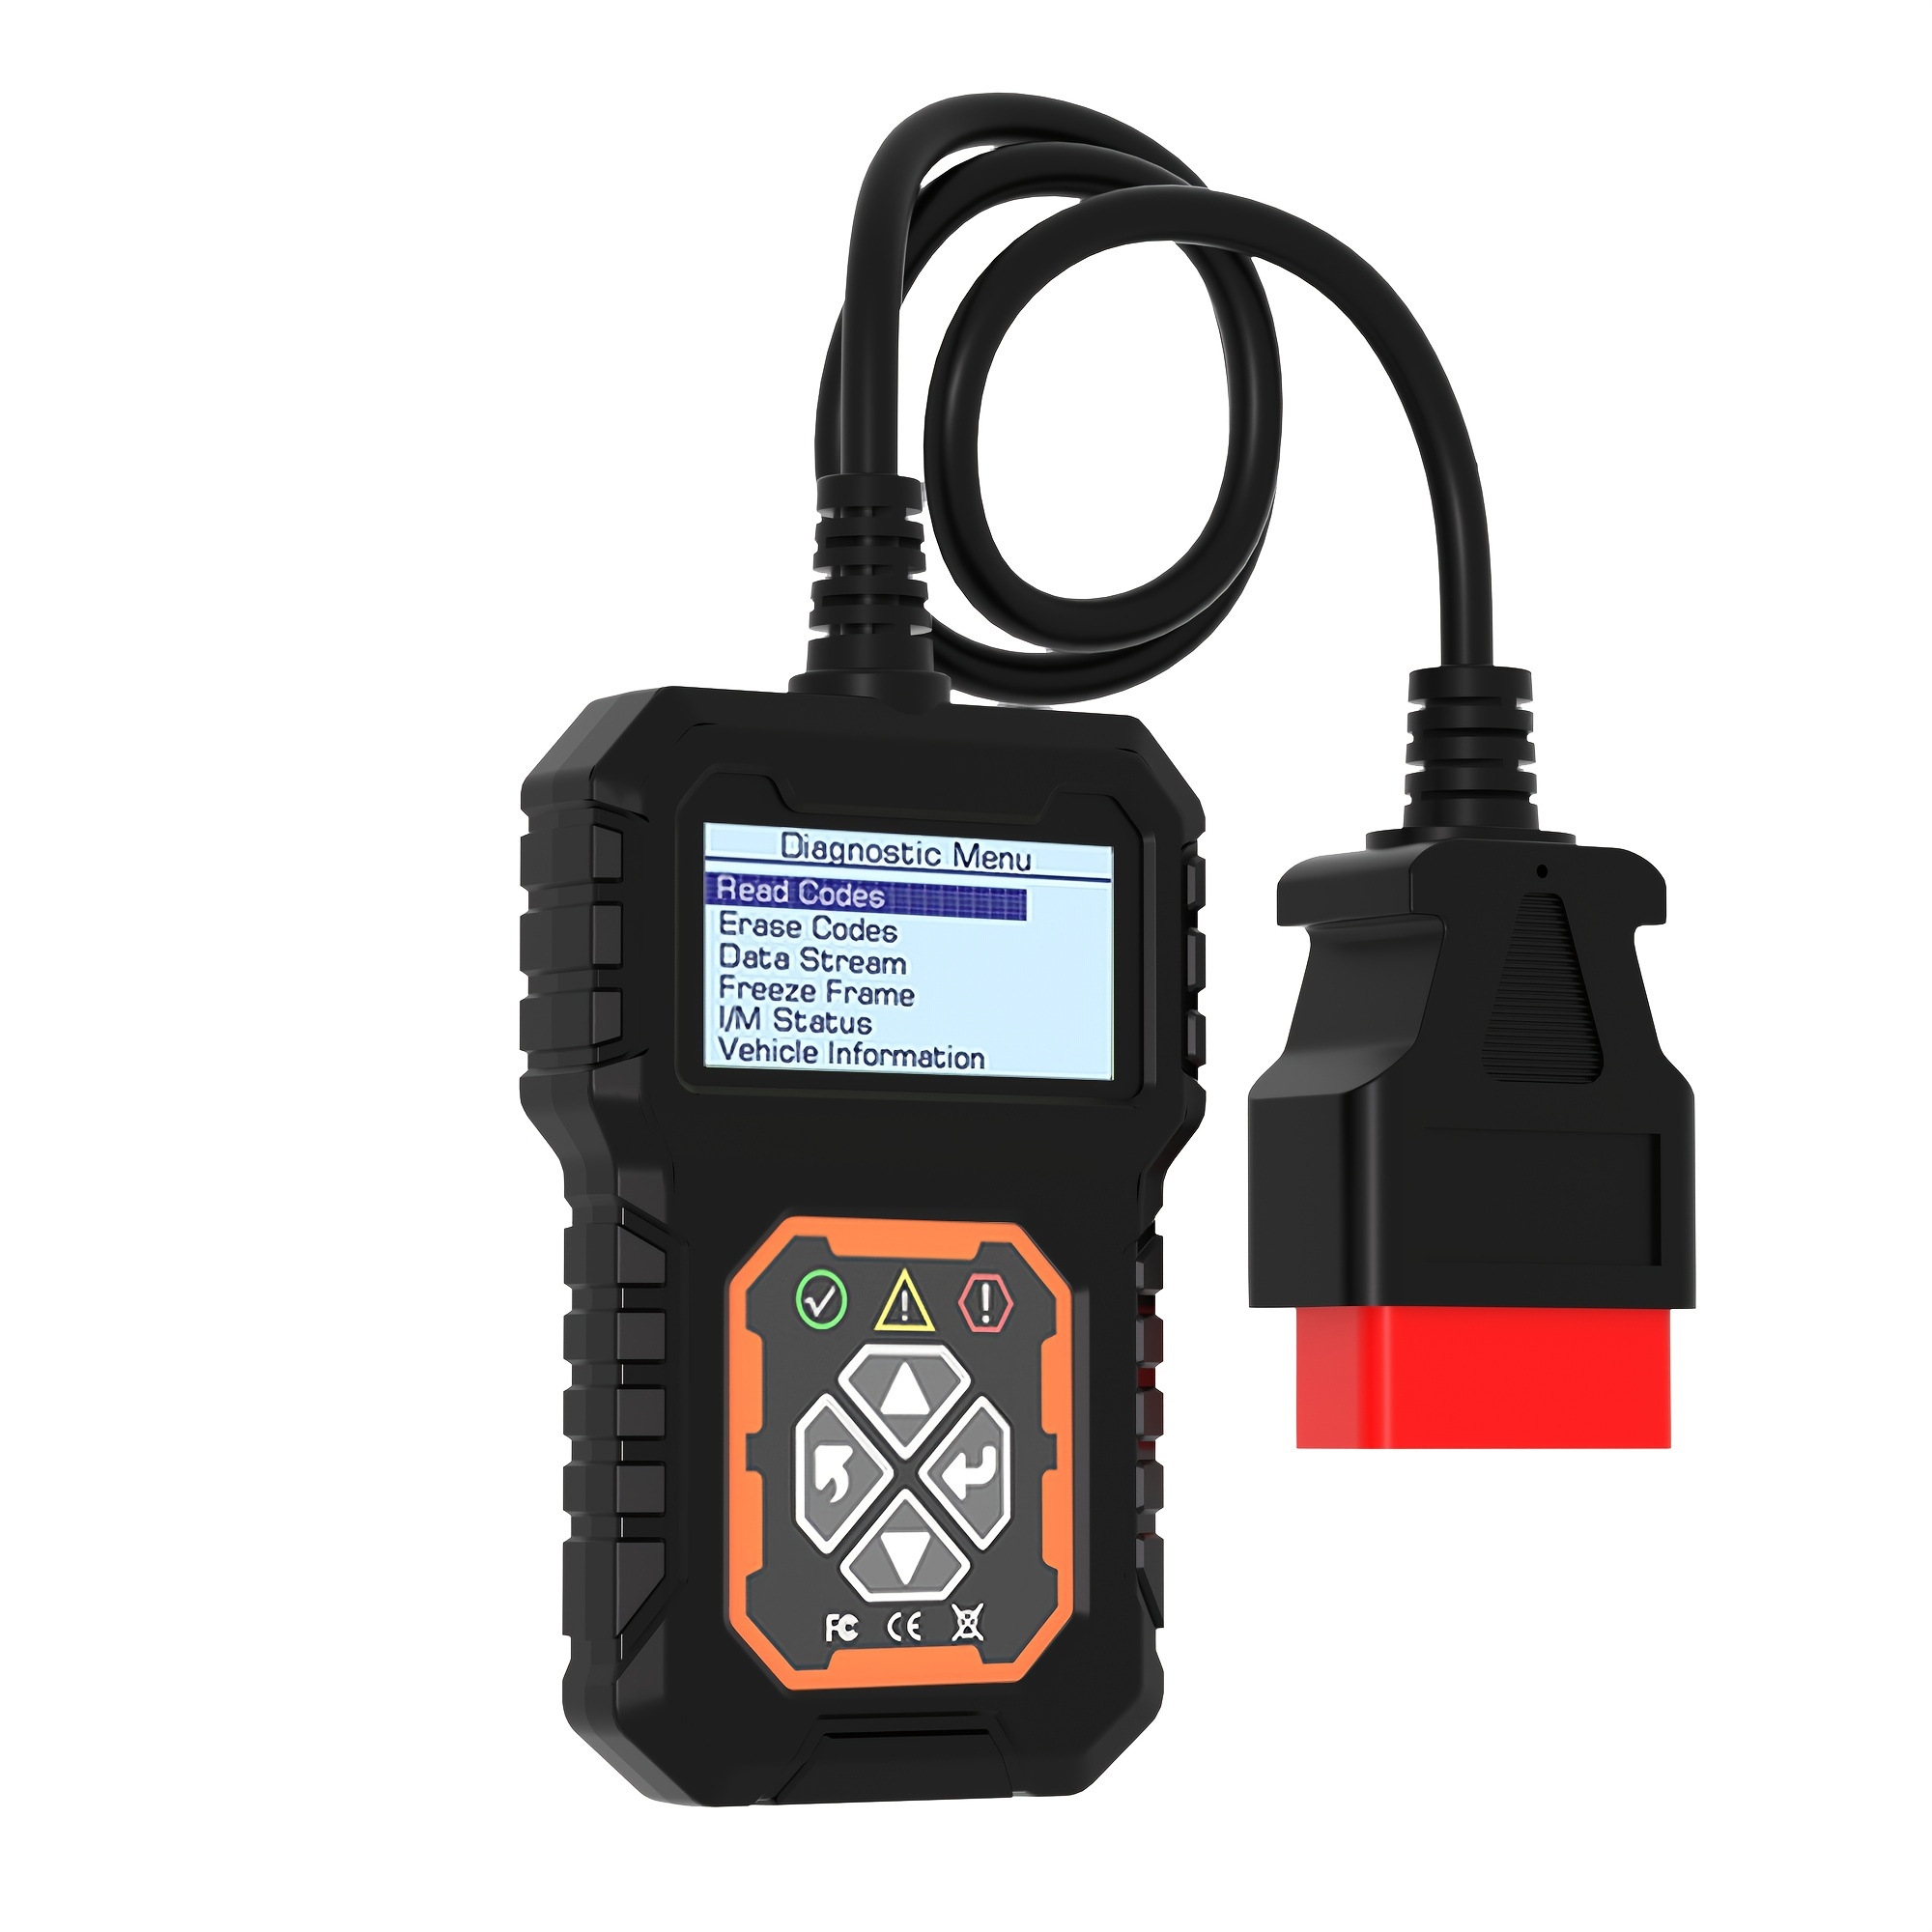 Get Rid of That Check Engine Light with Bargains on OBD2 Scanners